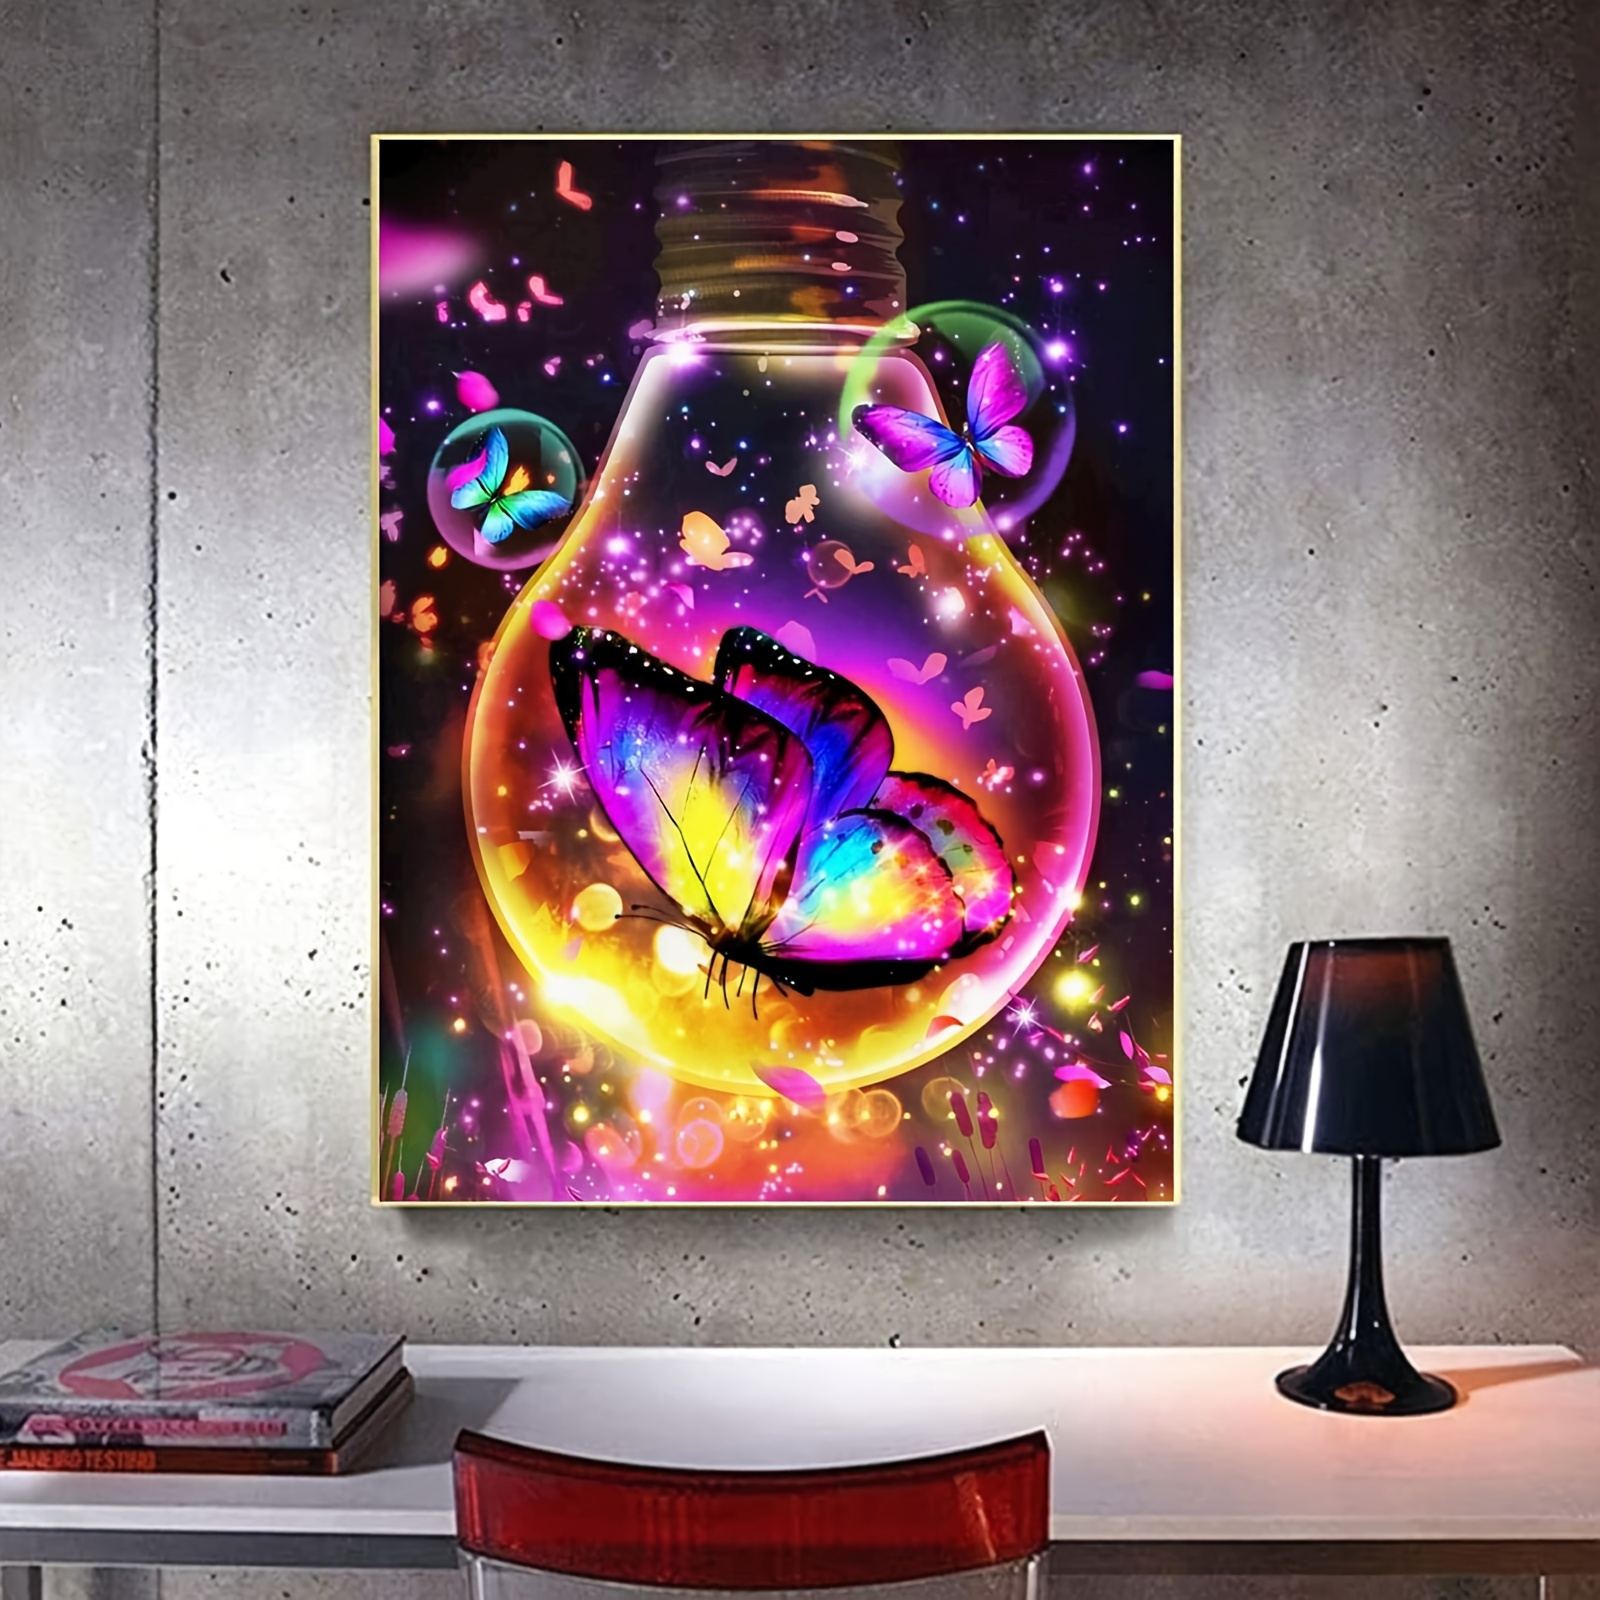 Diamond Painting Kits For Adults Diamond Art Kits For Adults Cartoon Gem  Art Kits For Adults For Gift Home Wall Decor 11.8x15.7 Inches